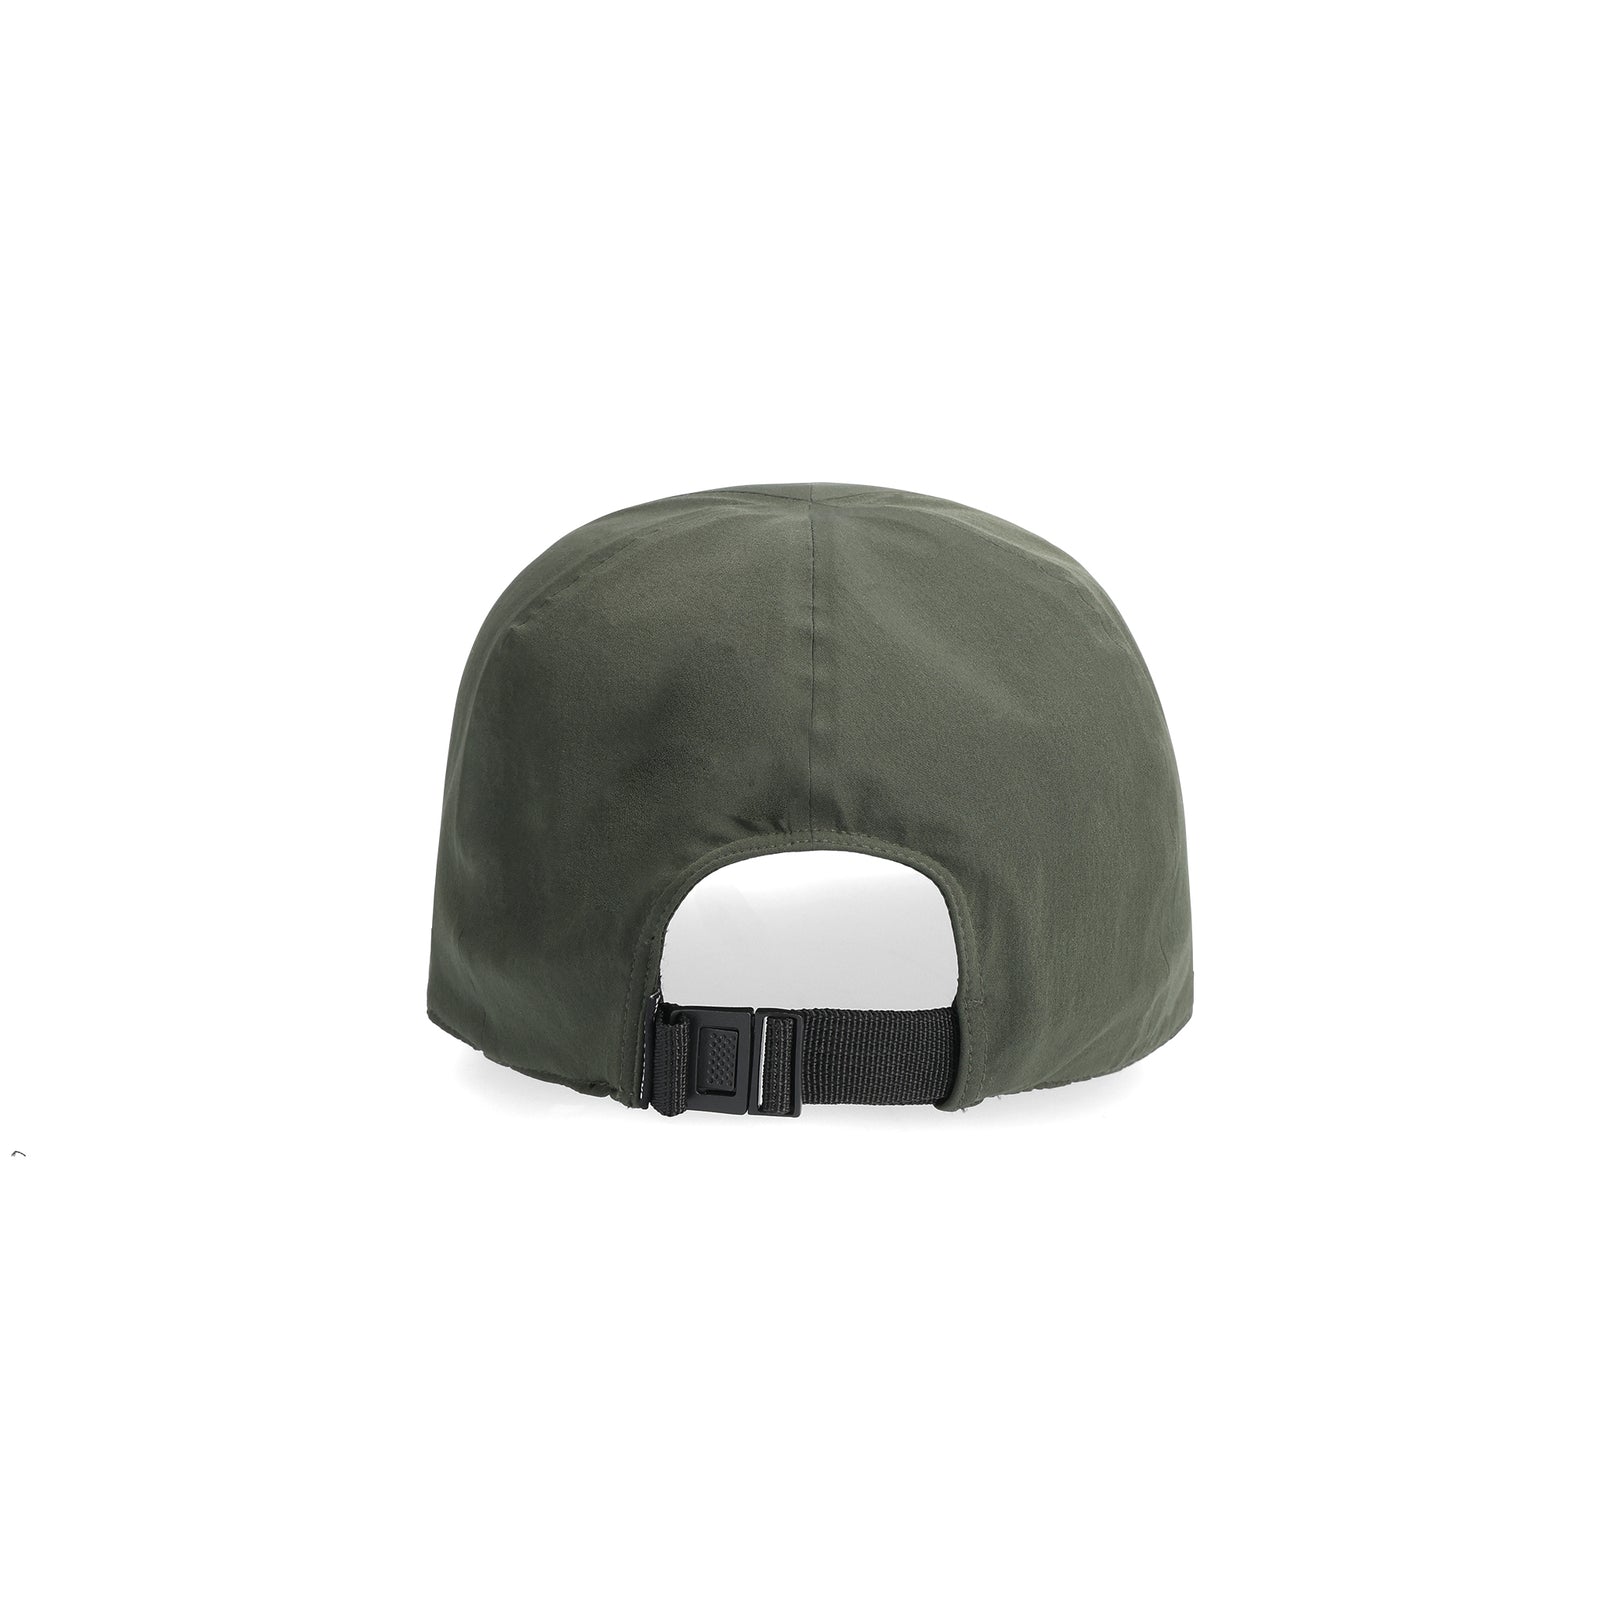 Back View of Topo Designs Global Tech Cap in "Olive"